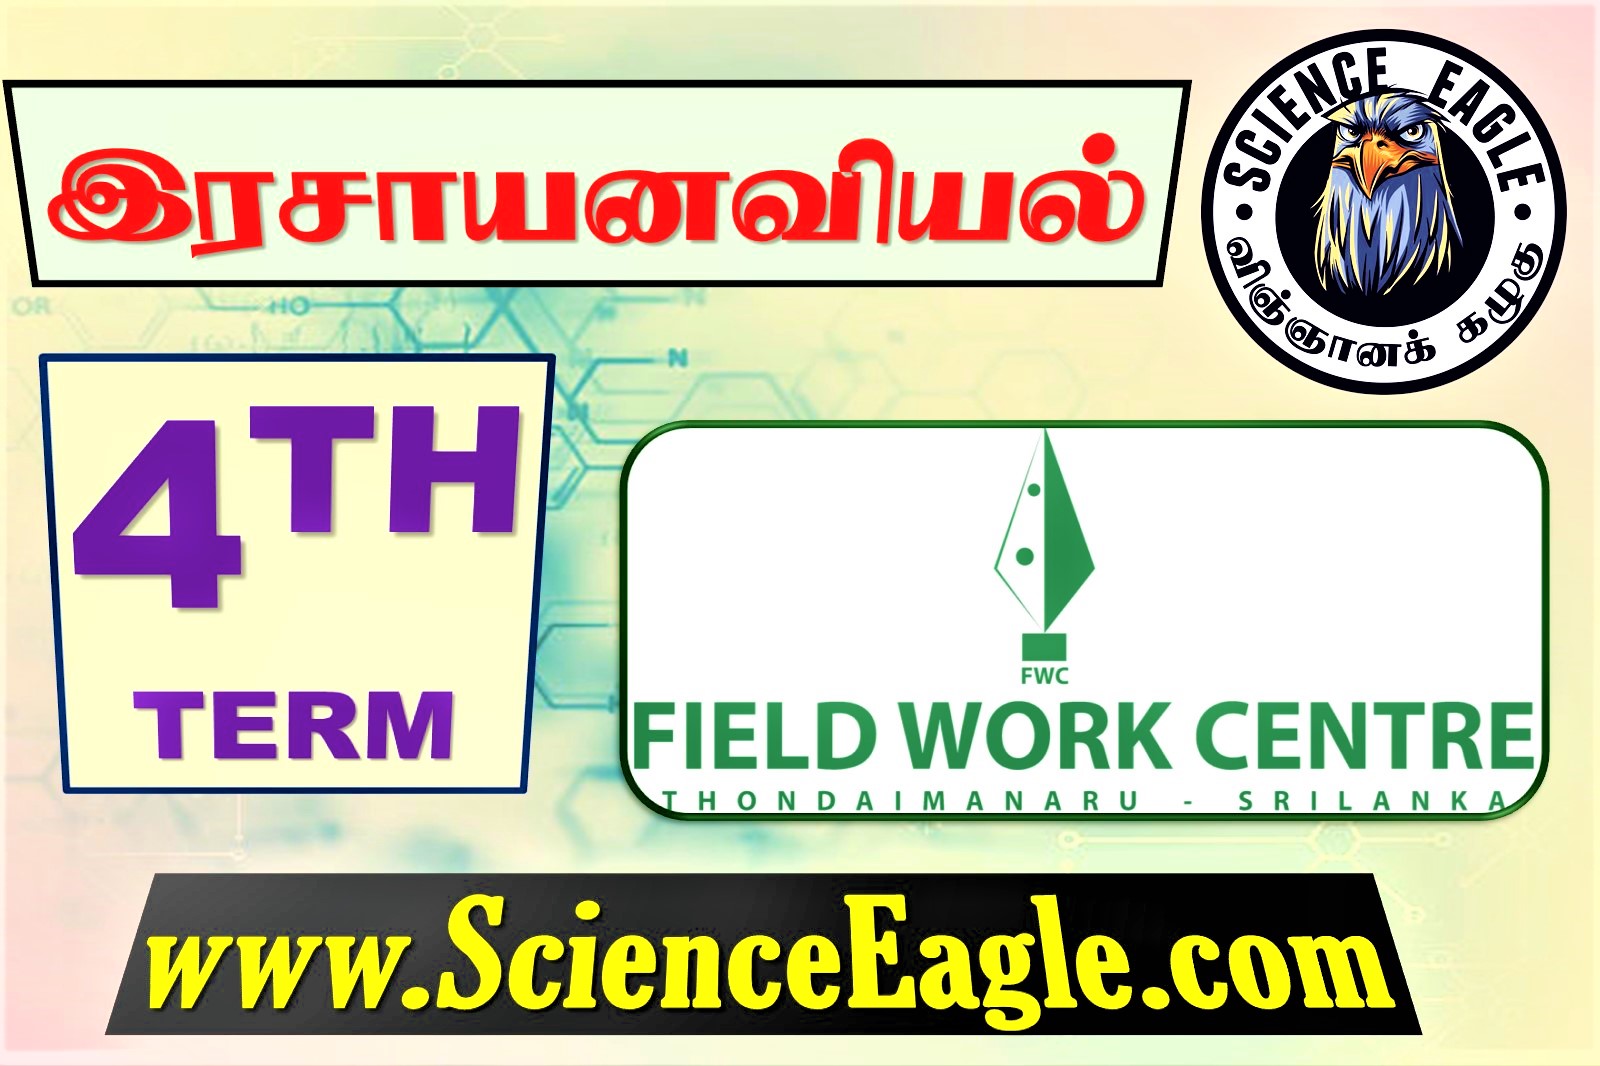 fwc 4th term papers 2023 tamil